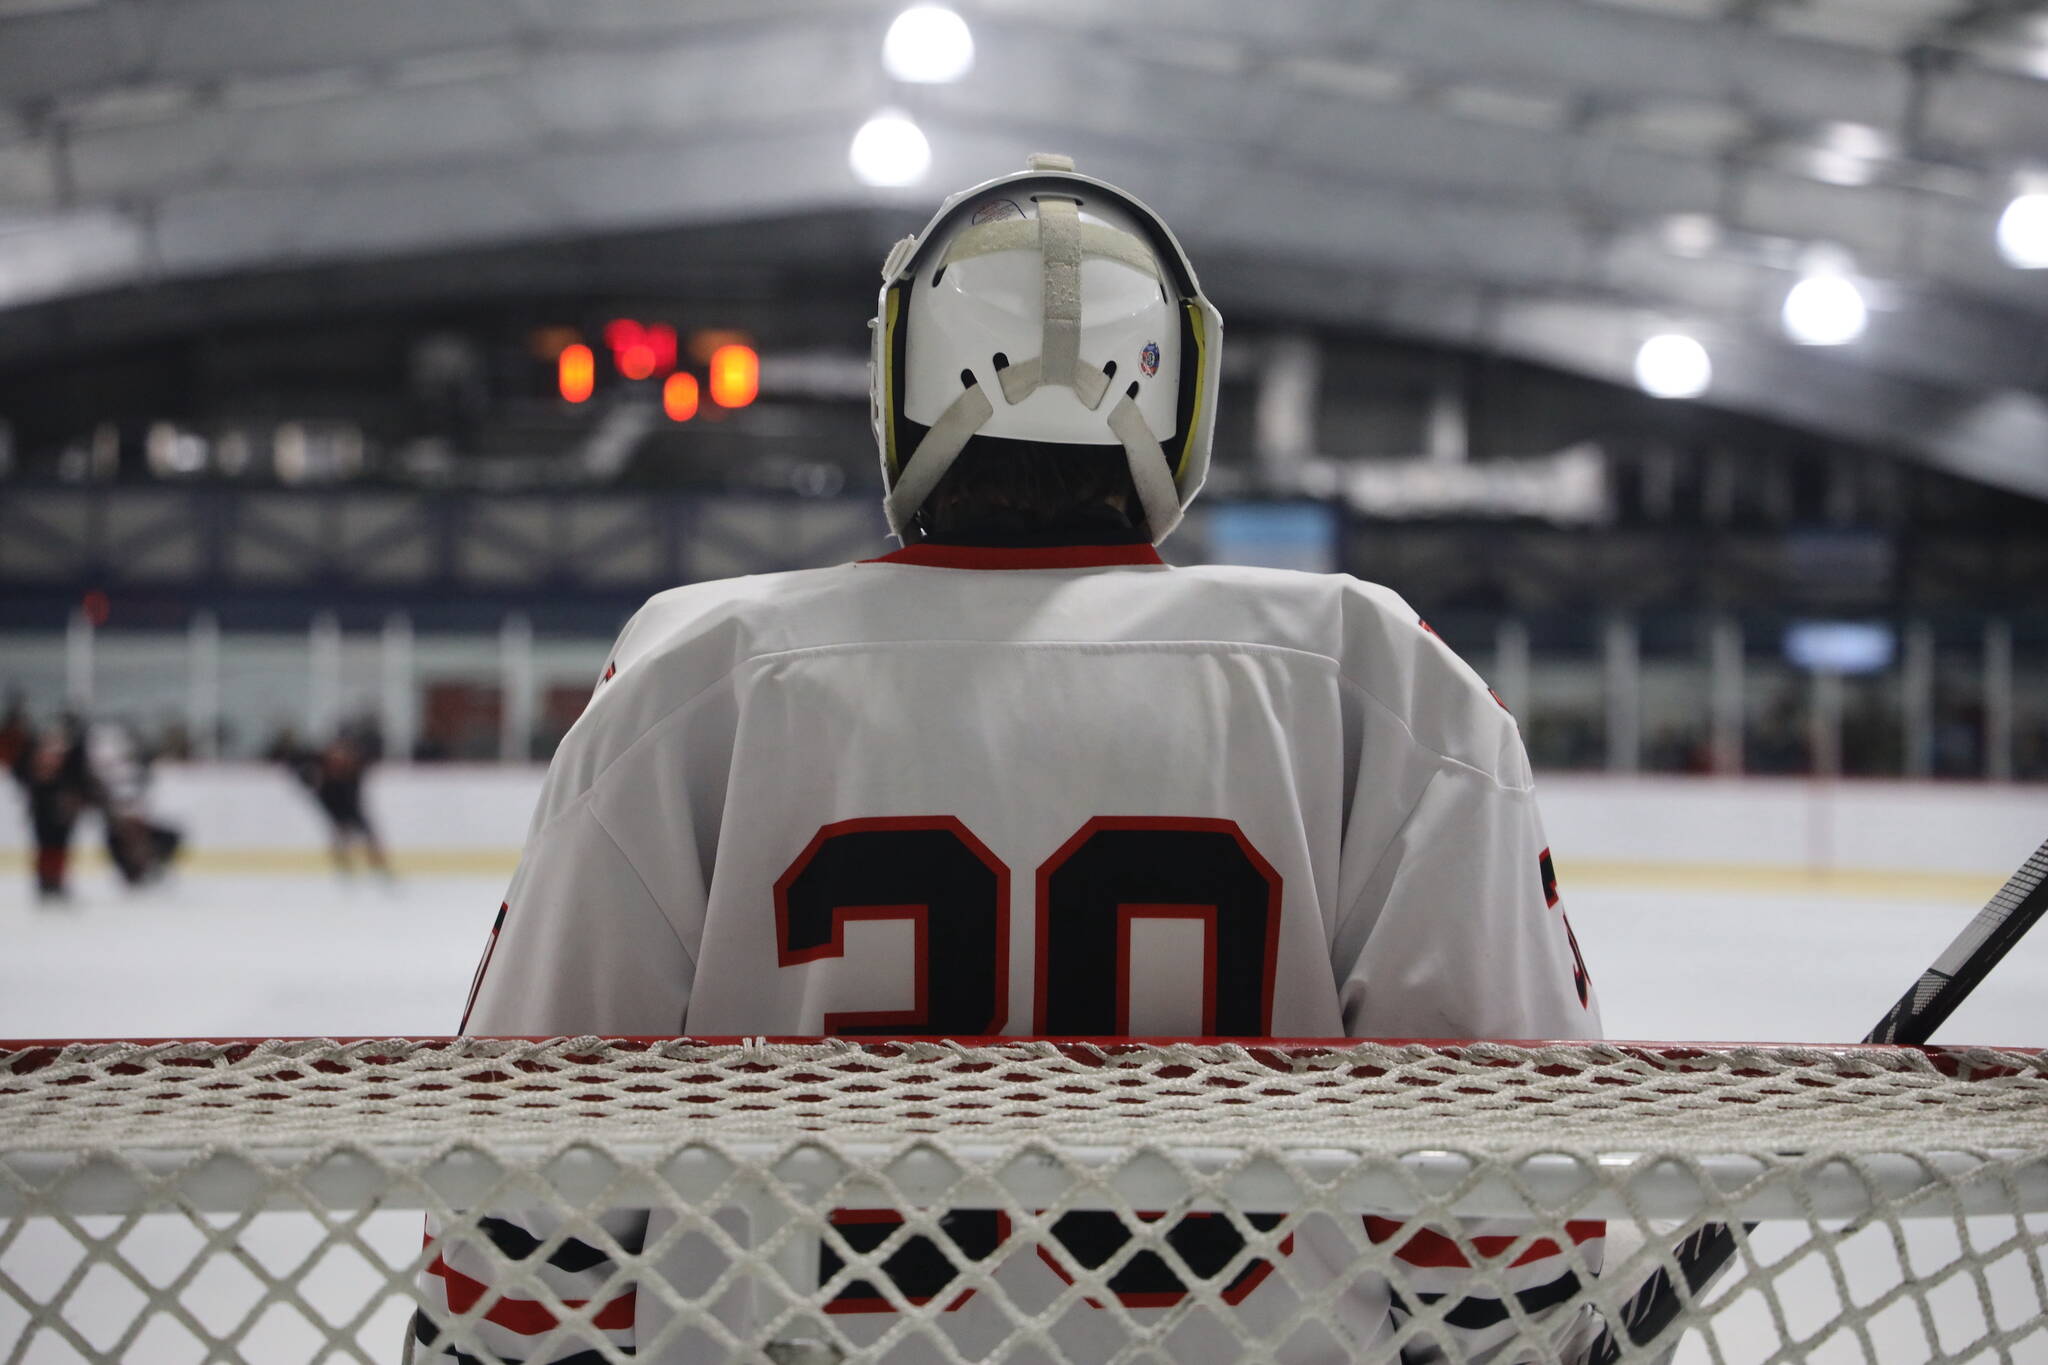 Junior Mason Sooter tends the net as the puck is in the opposite zone during a home game between Juneau-Douglas High School: Yadaa.at Kalé Crimson Bears Varsity hockey team and the Kenai Central Kardinals at the Treadwell Arena Saturday afternoon. (Clarise Larson / Juneau Empire)